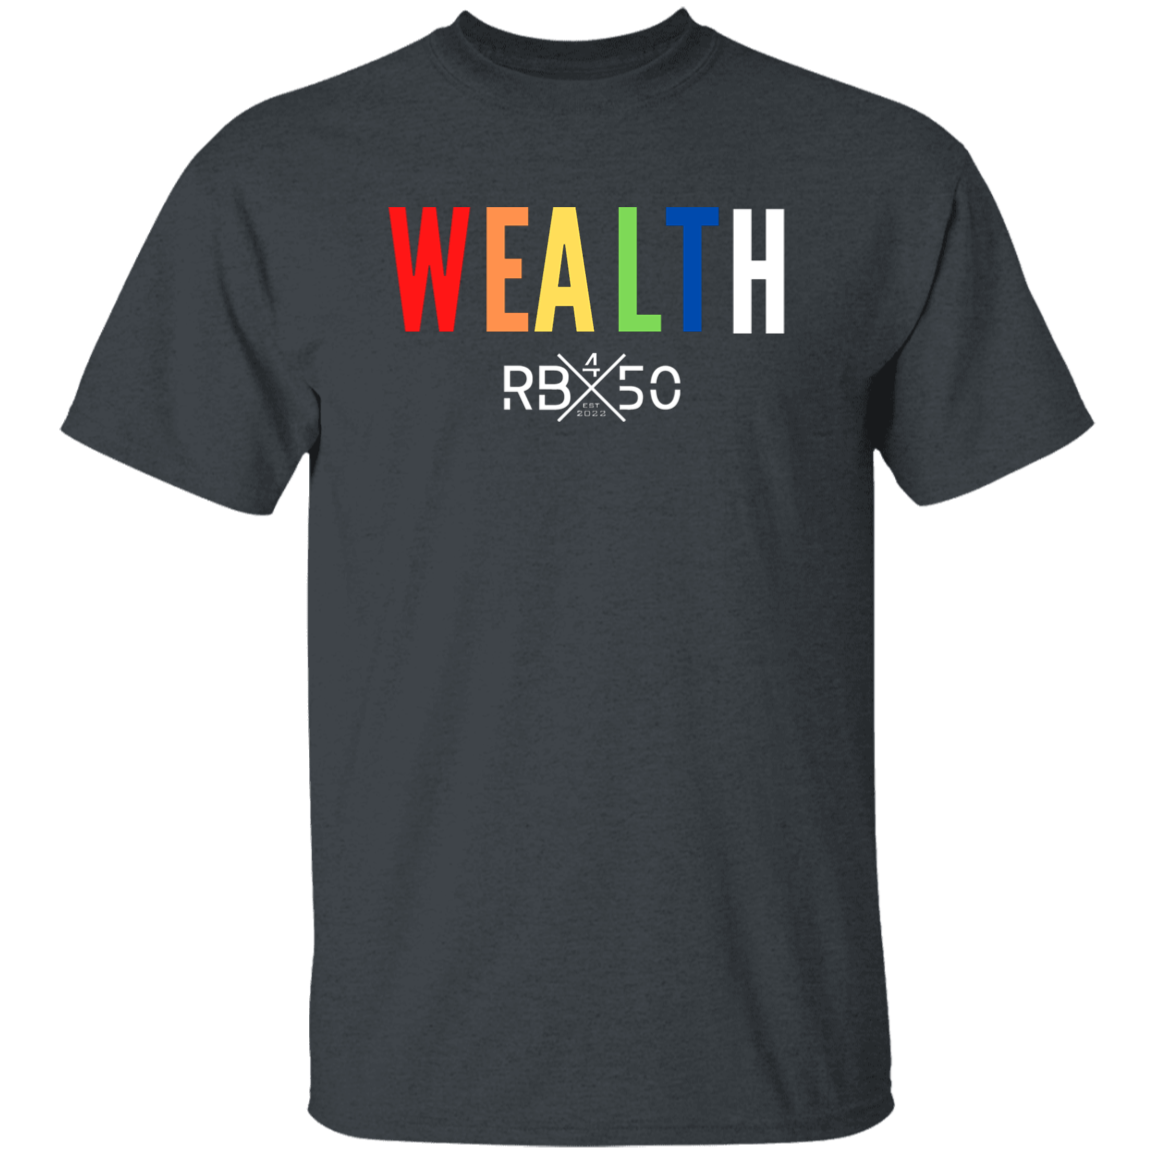 RB450 WEALTH Youth 5.3 oz 100% Cotton T-Shirt